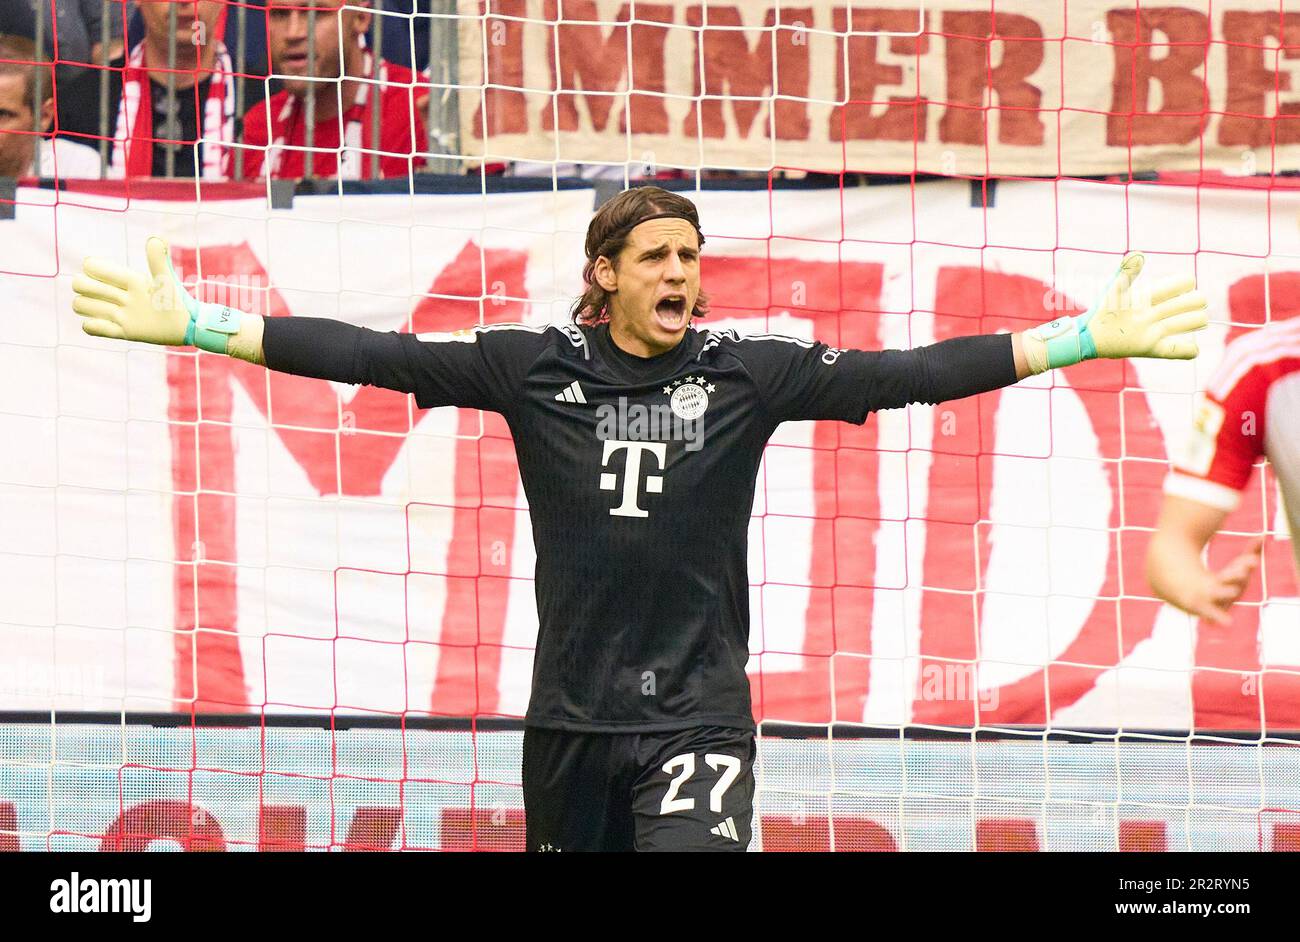 Yann Sommer, FCB 27 goalkeeper   in the match FC BAYERN MUENCHEN - RB LEIPZIG 1.German Football League on May 20, 2023 in Munich, Germany. Season 2022/2023, matchday 33, 1.Bundesliga, FCB, München, 33.Spieltag. © Peter Schatz / Alamy Live News    - DFL REGULATIONS PROHIBIT ANY USE OF PHOTOGRAPHS as IMAGE SEQUENCES and/or QUASI-VIDEO - Stock Photo